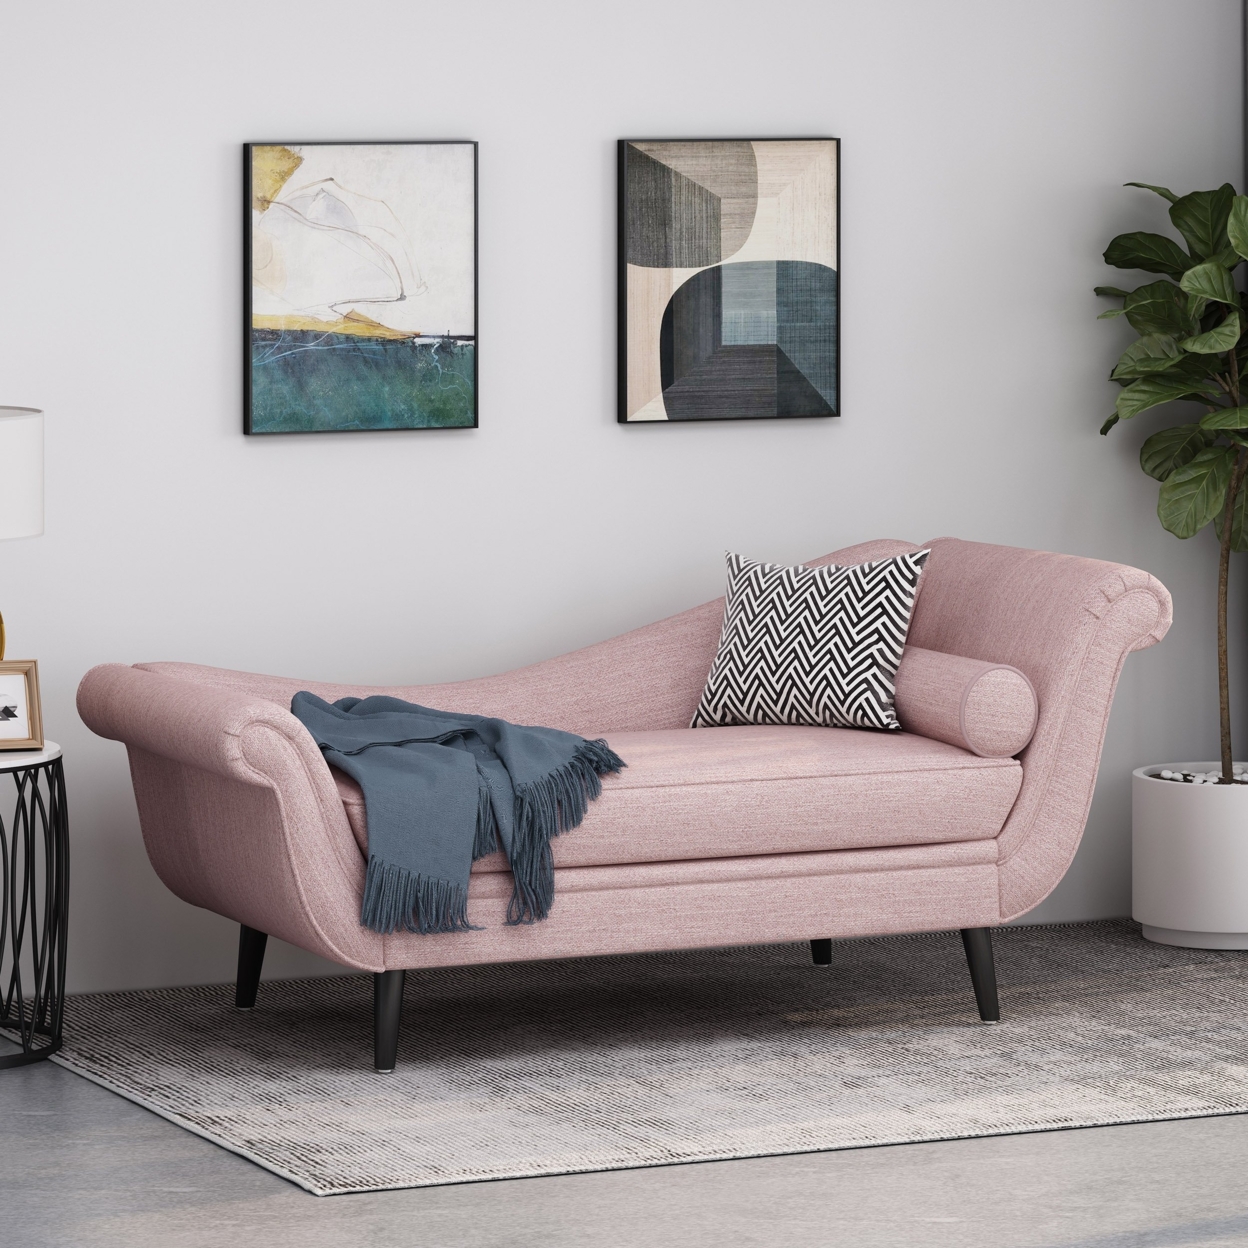 Jakyrah Contemporary Chaise Lounge With Scroll Arms - Light Blush